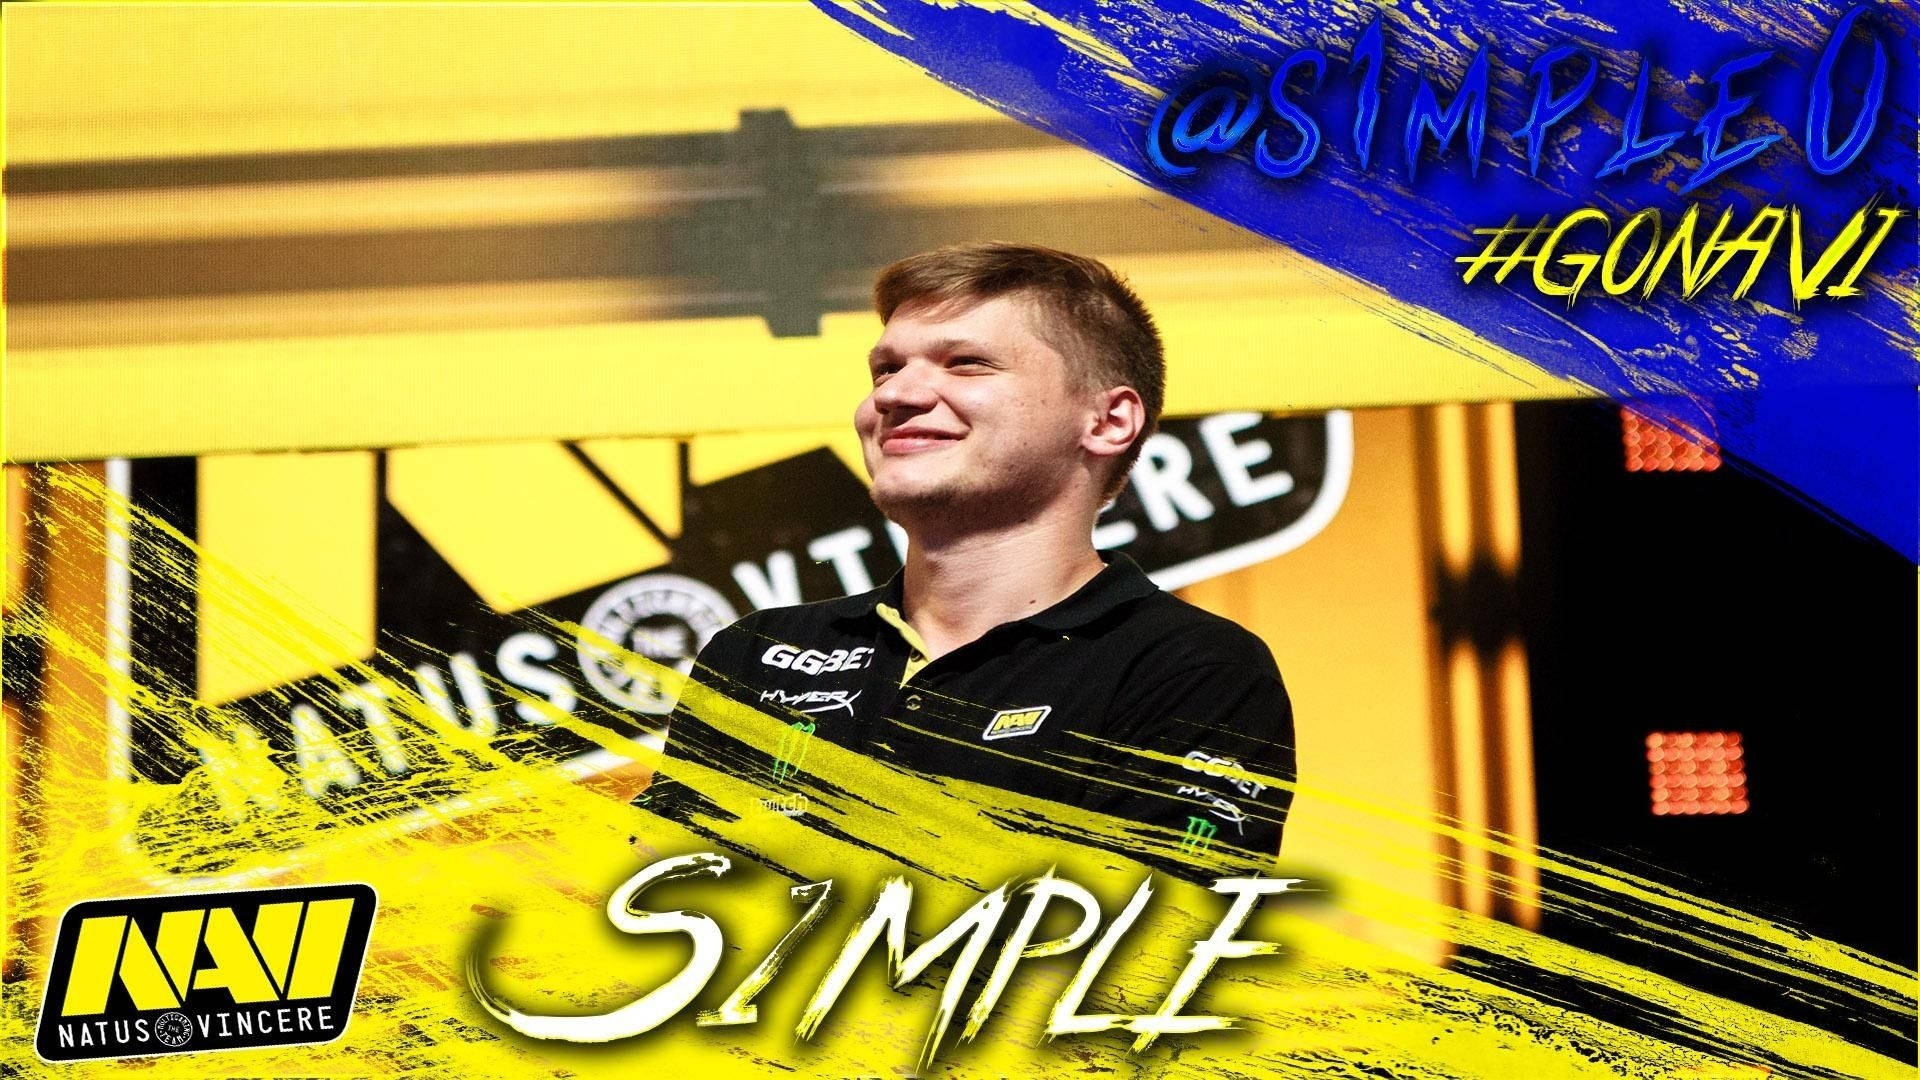 Cute S1mple Natus Vincere Background